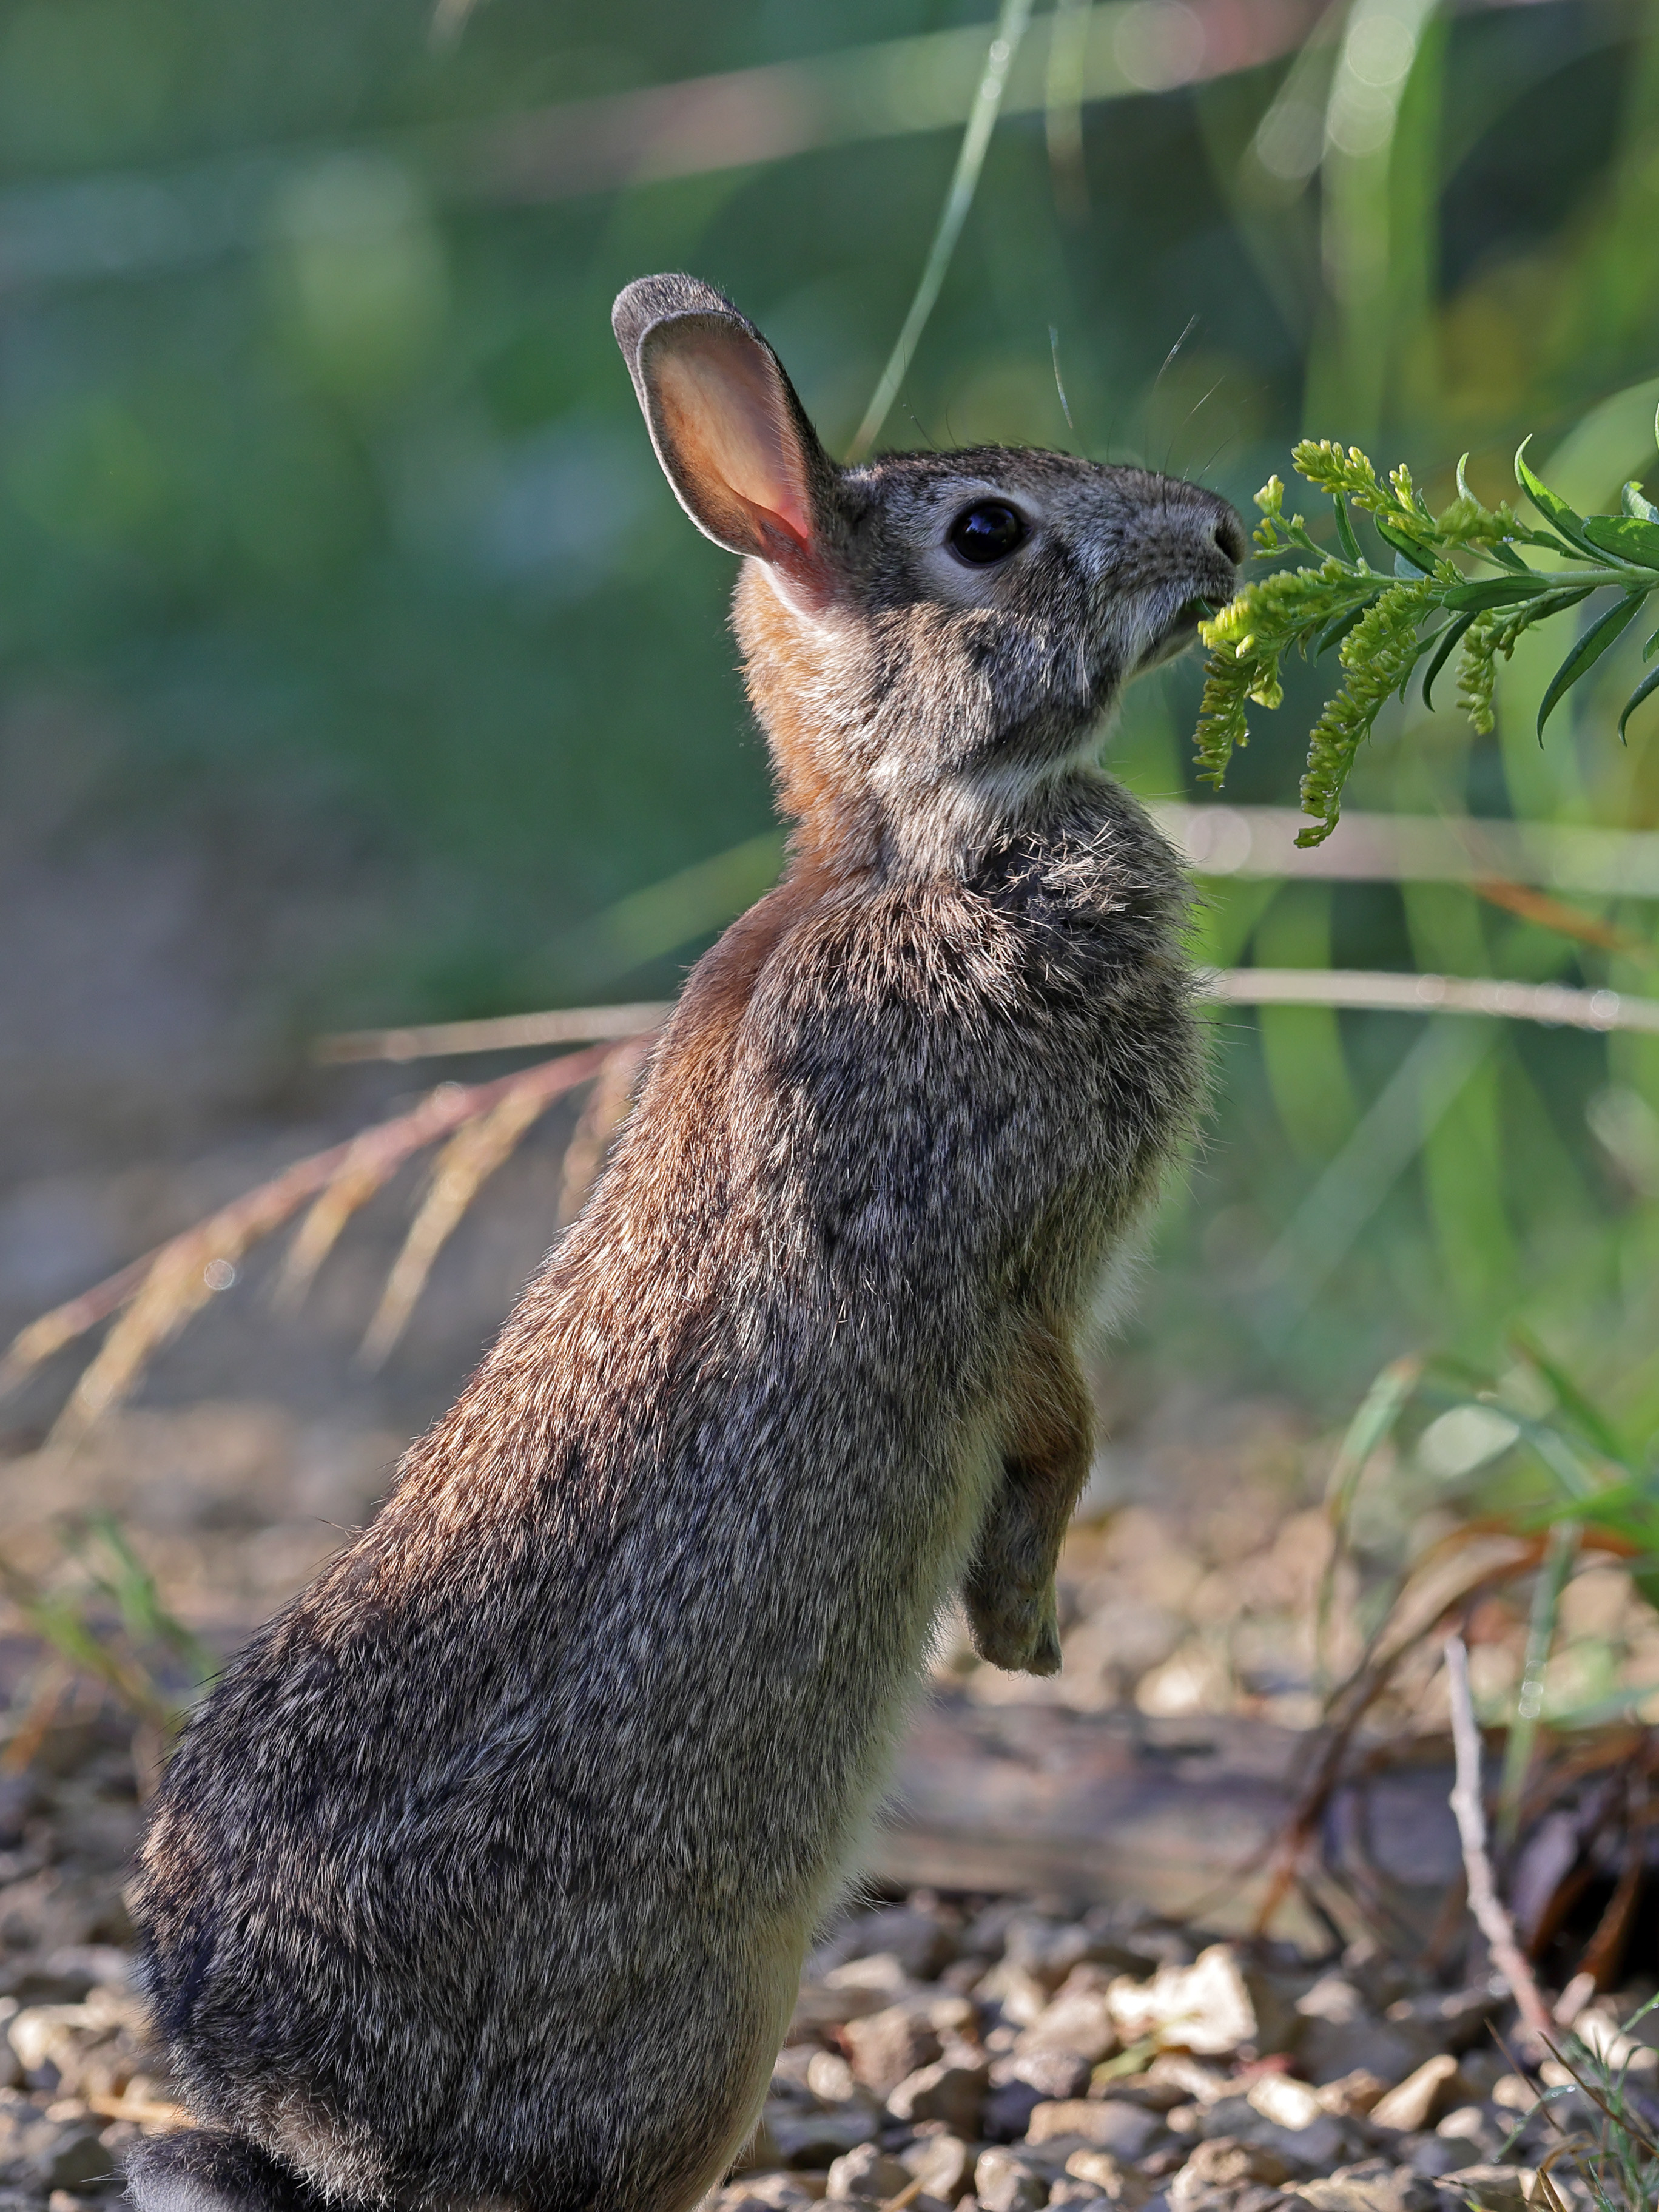 143256 Screensavers and Wallpapers Rabbit for phone. Download animals, grass, animal, profile, rabbit, hare pictures for free